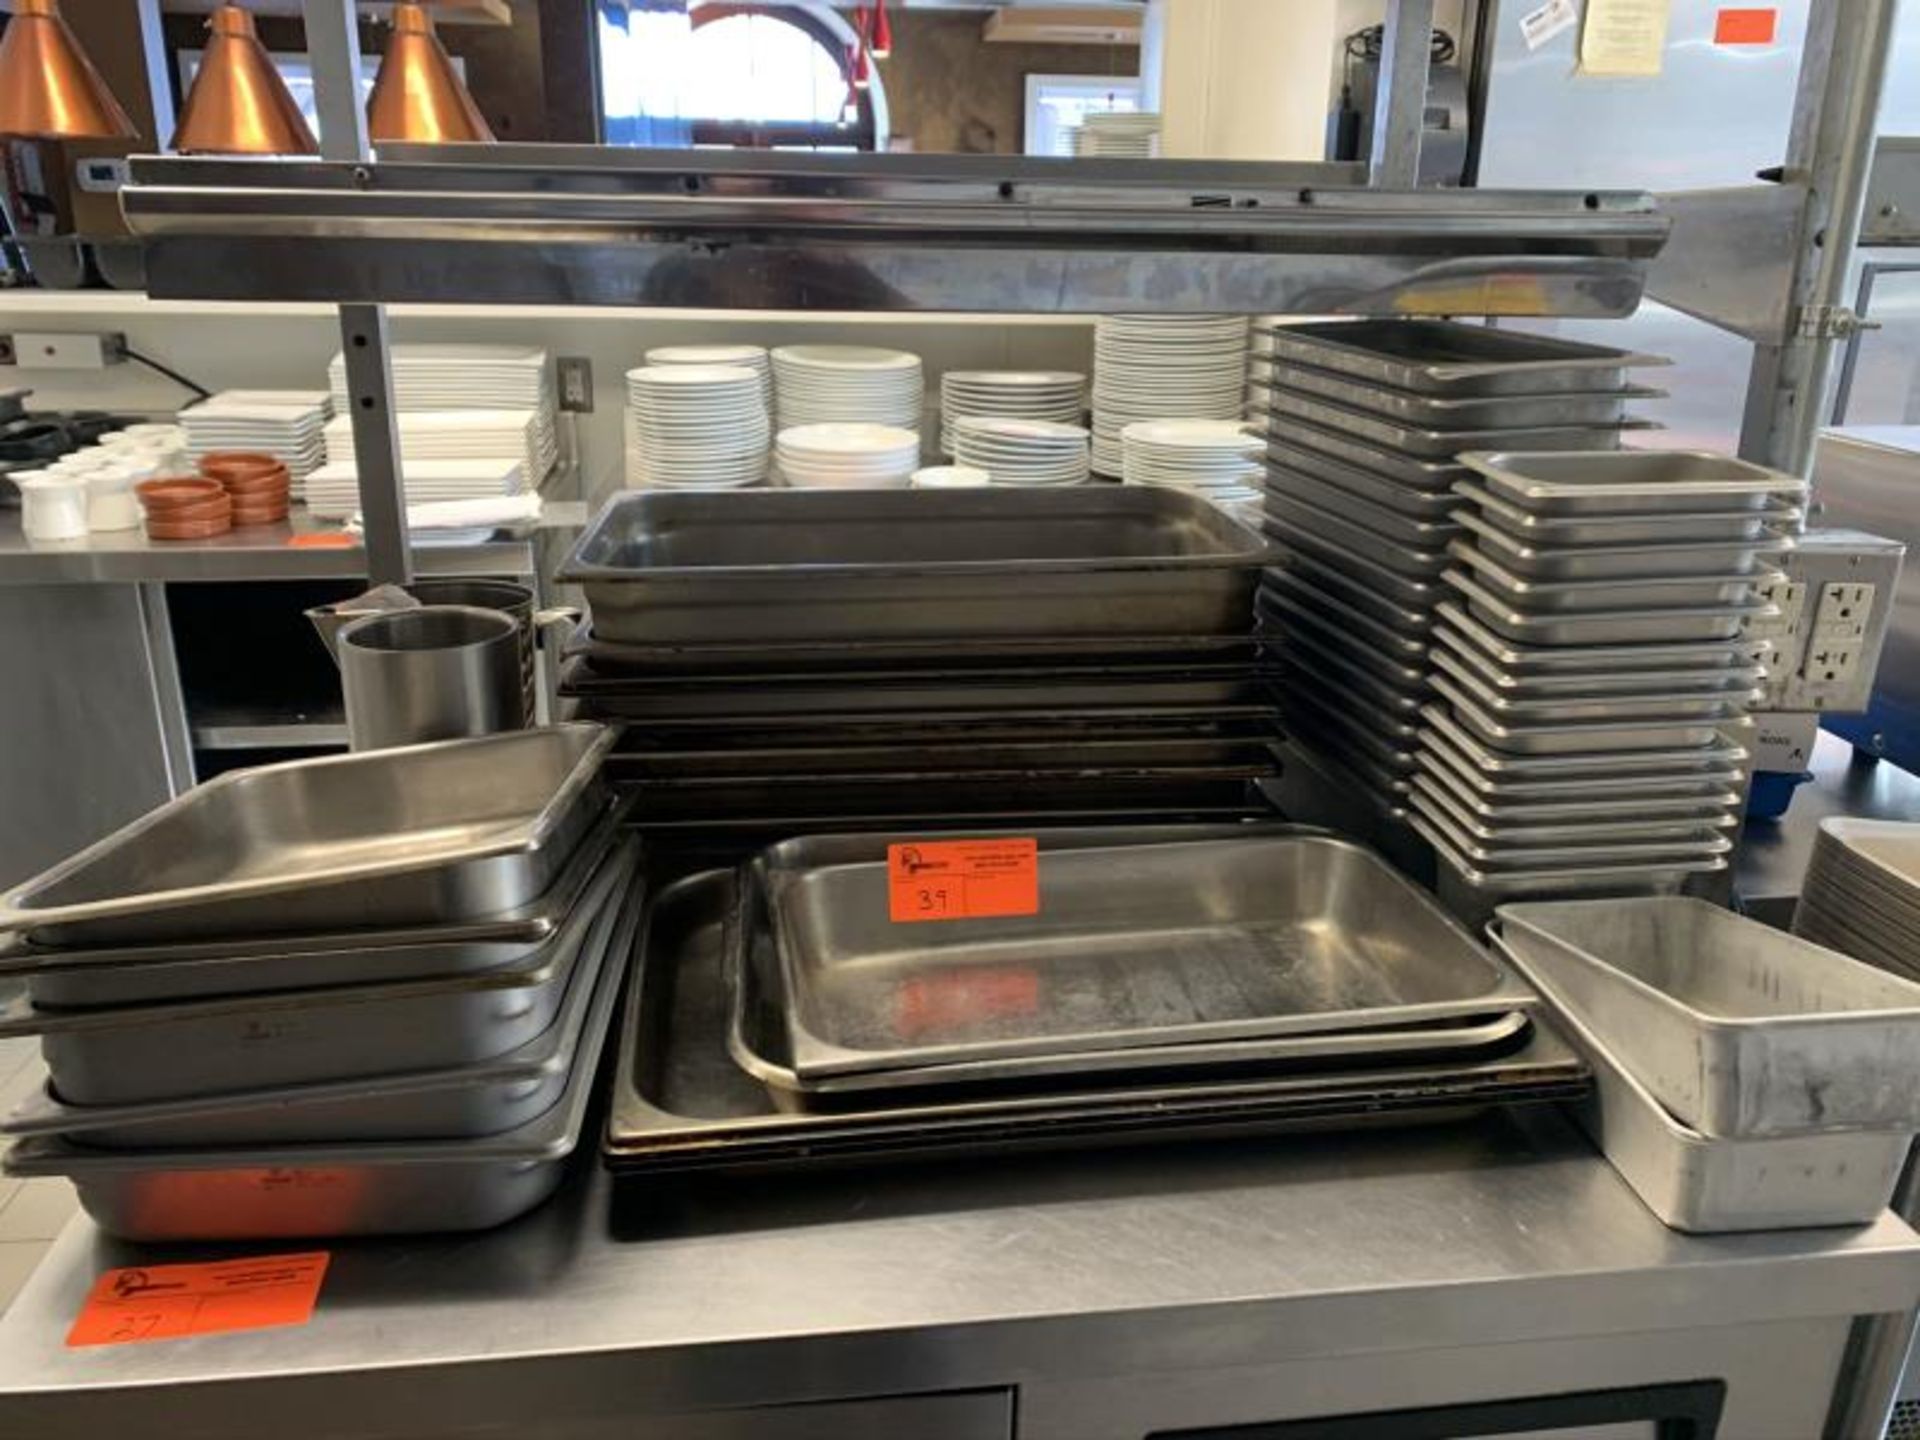 Lot of hotel pans, trays, stainless steel inserts